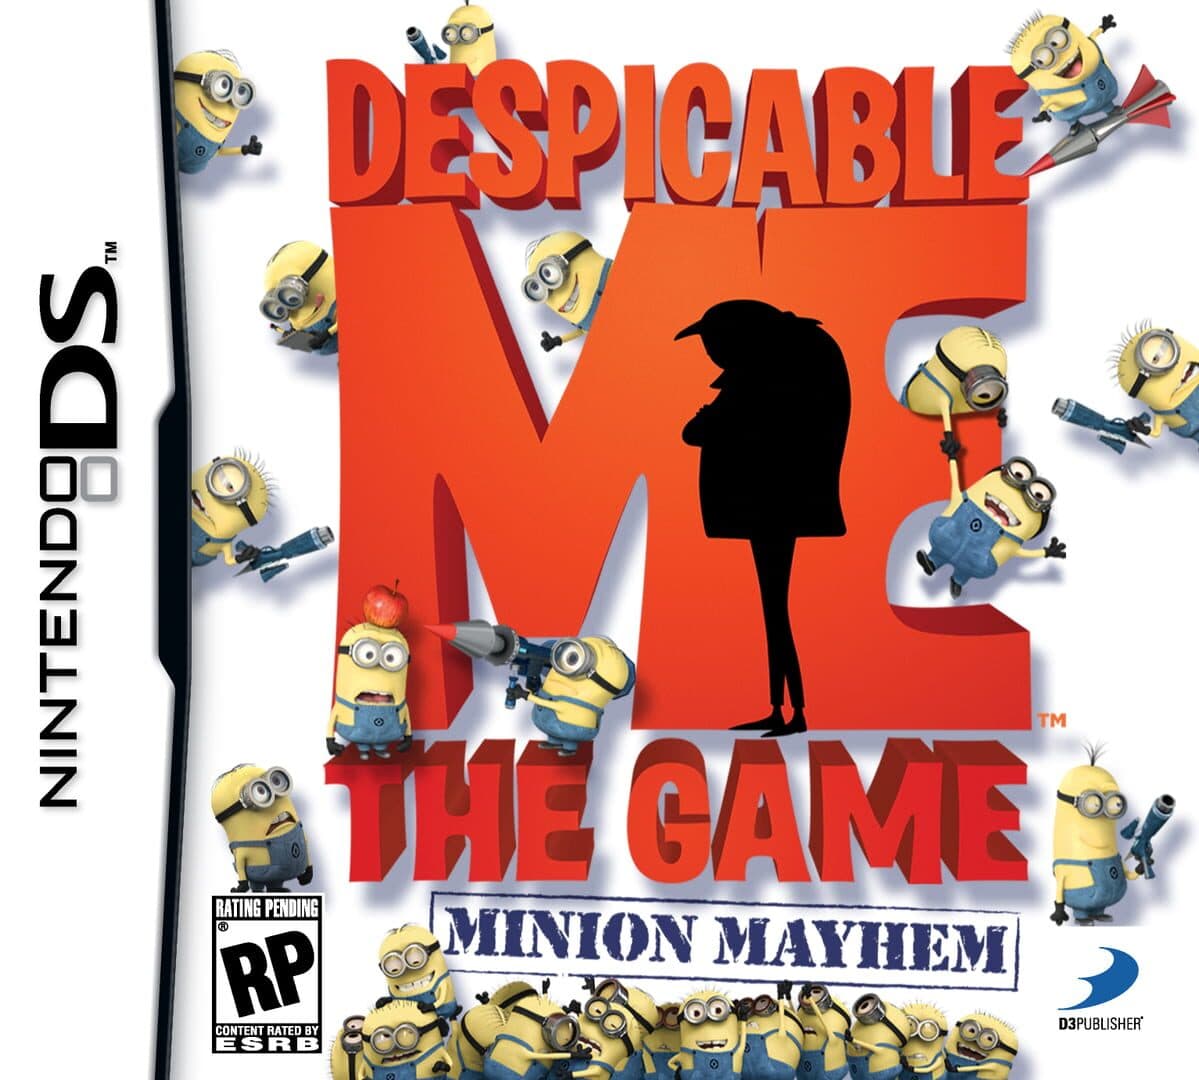 Despicable Me: The Game - Minion Mayhem cover art